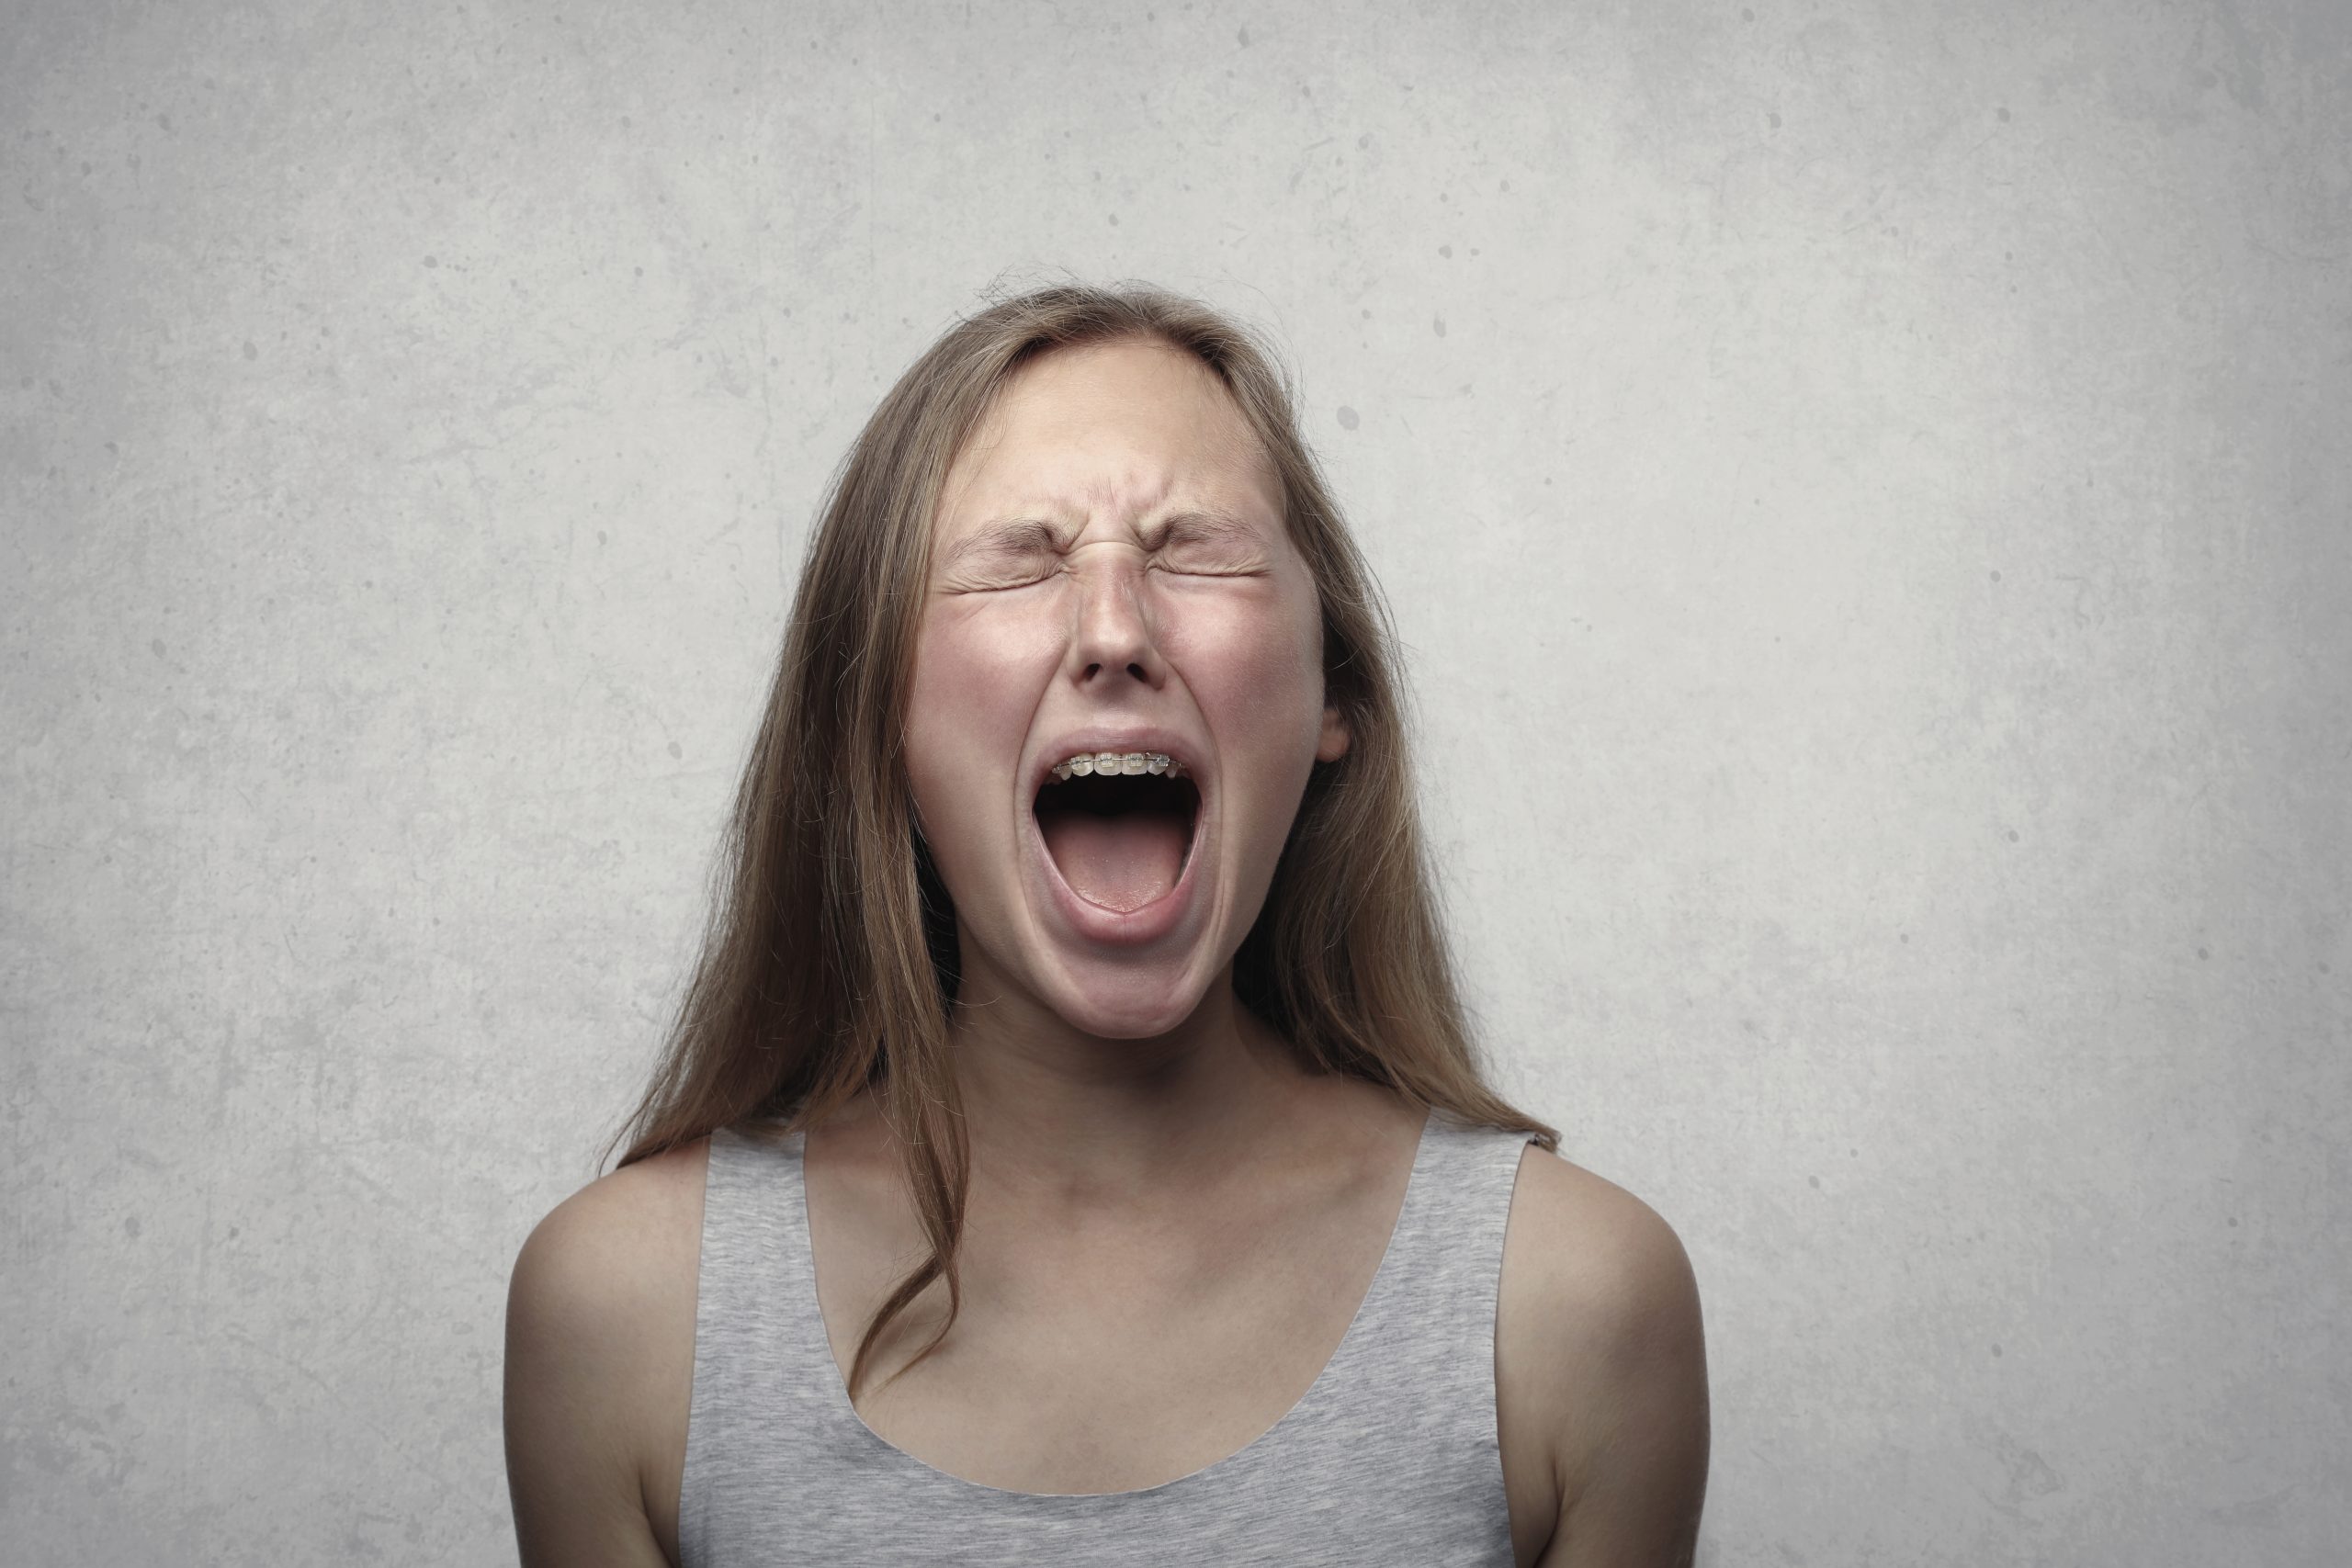 ANGRY BRAIN – How does your brain work?